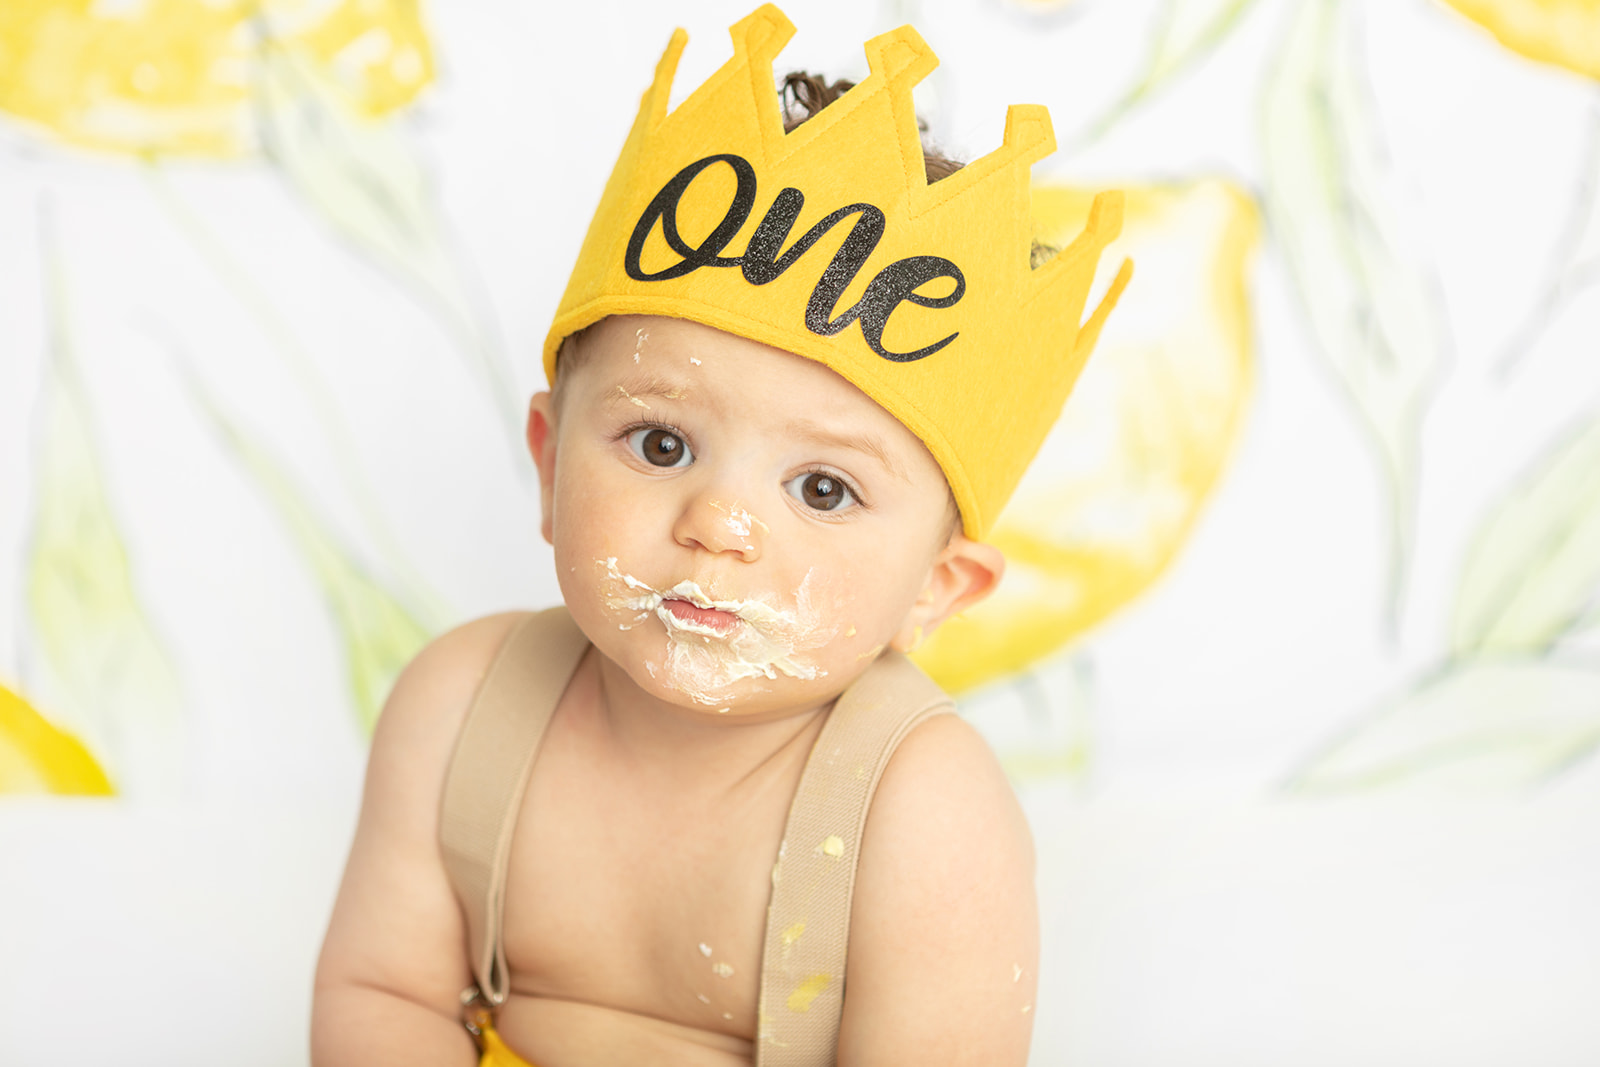 A one year-old little boy looks at the camera with a serious expression (with frosting and cake all over his face and suspenders). He wears a golden yellow first birthday crown. In the background is a handpainted lemon backdrop by Heidi Hope.